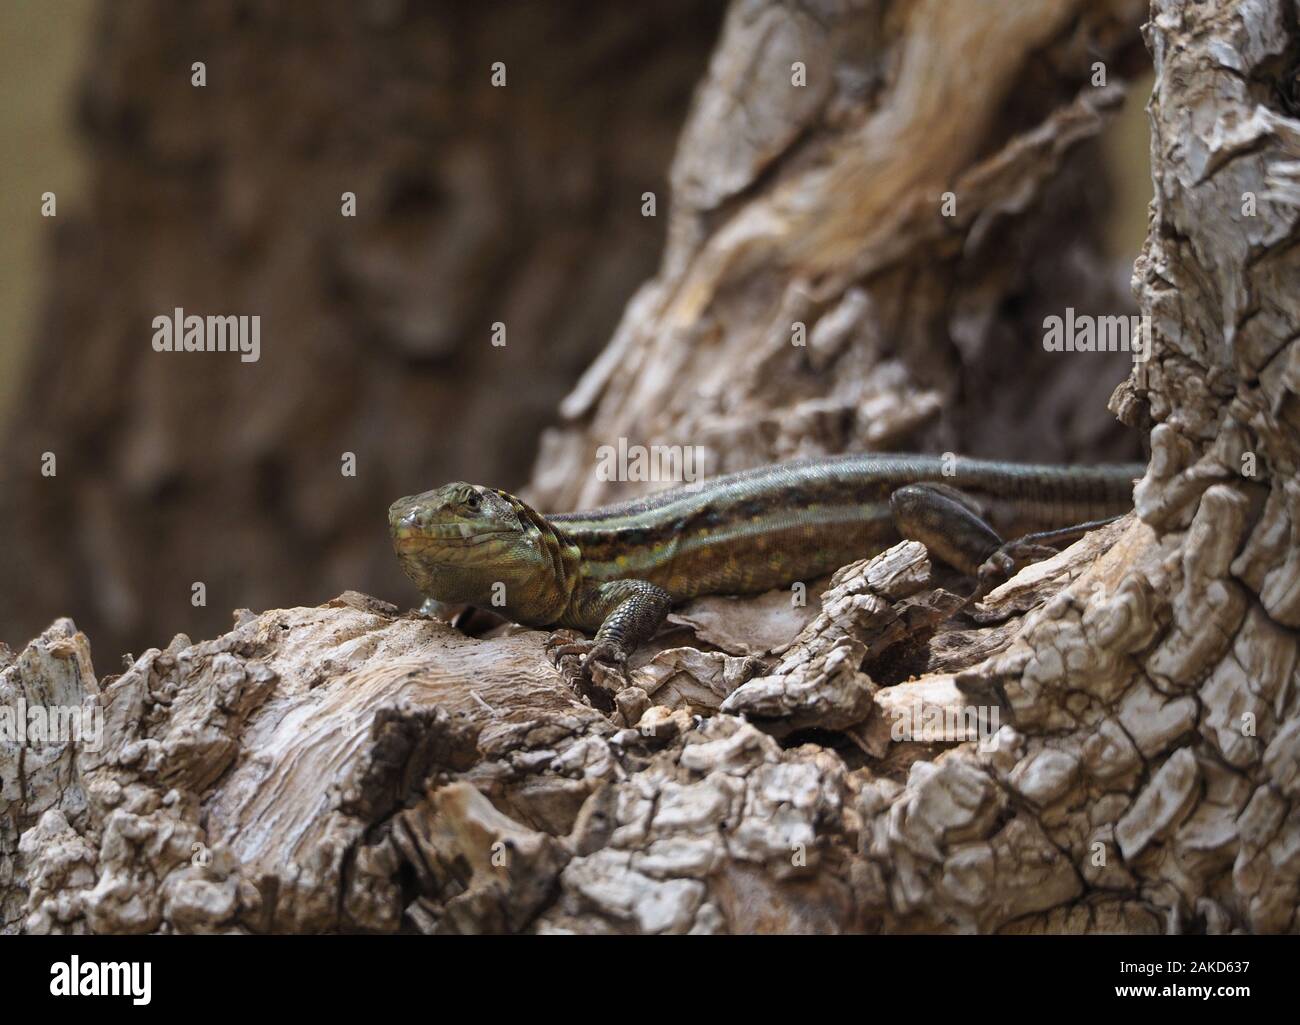 close up to lizard in a trunk Stock Photo